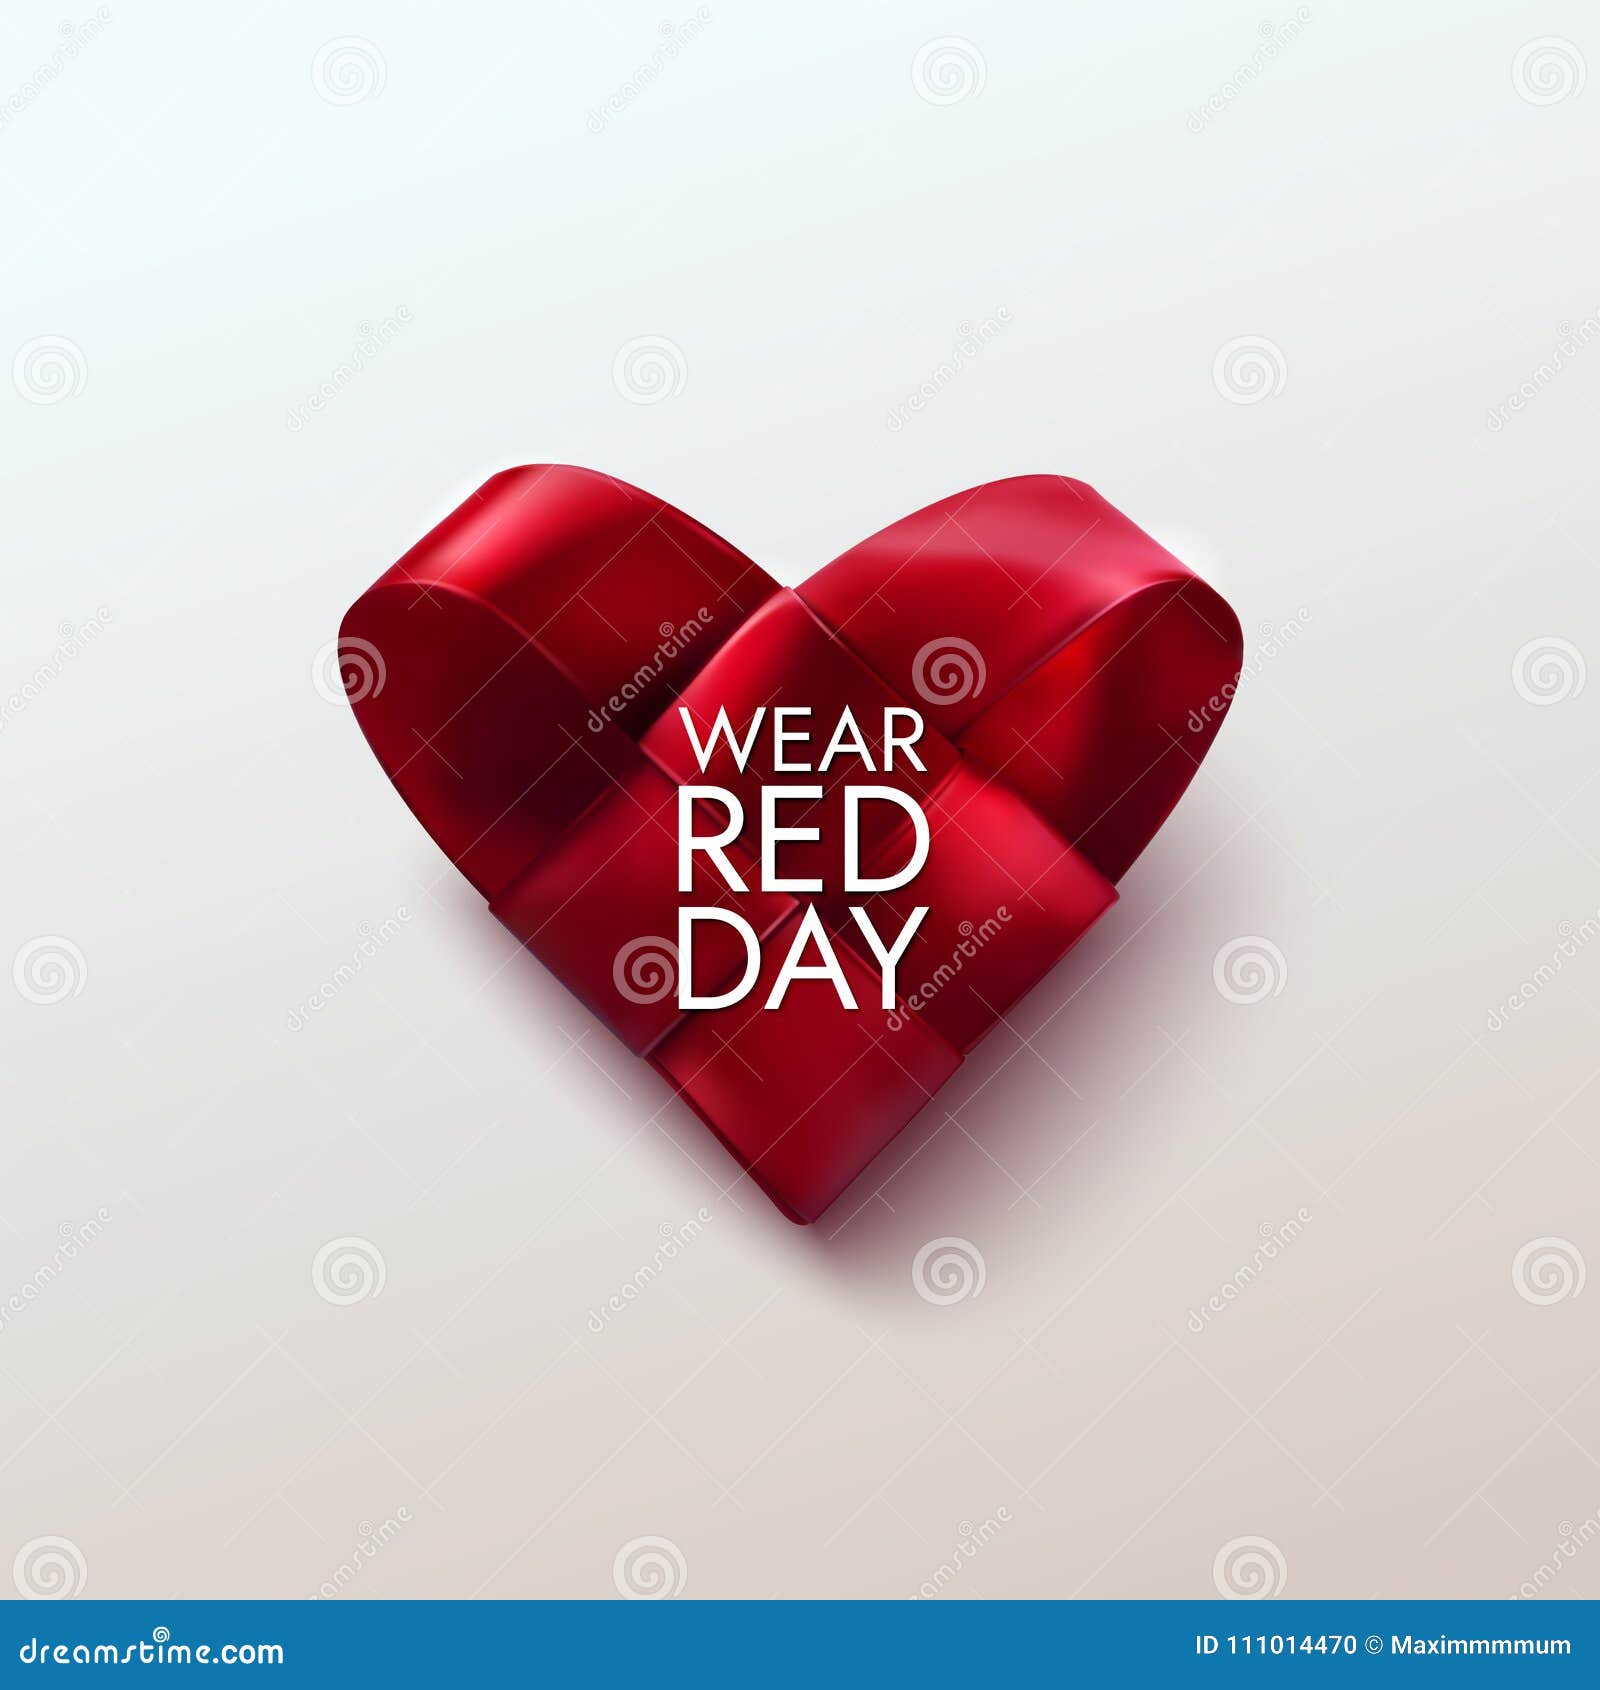 Today is National Wear Red Day